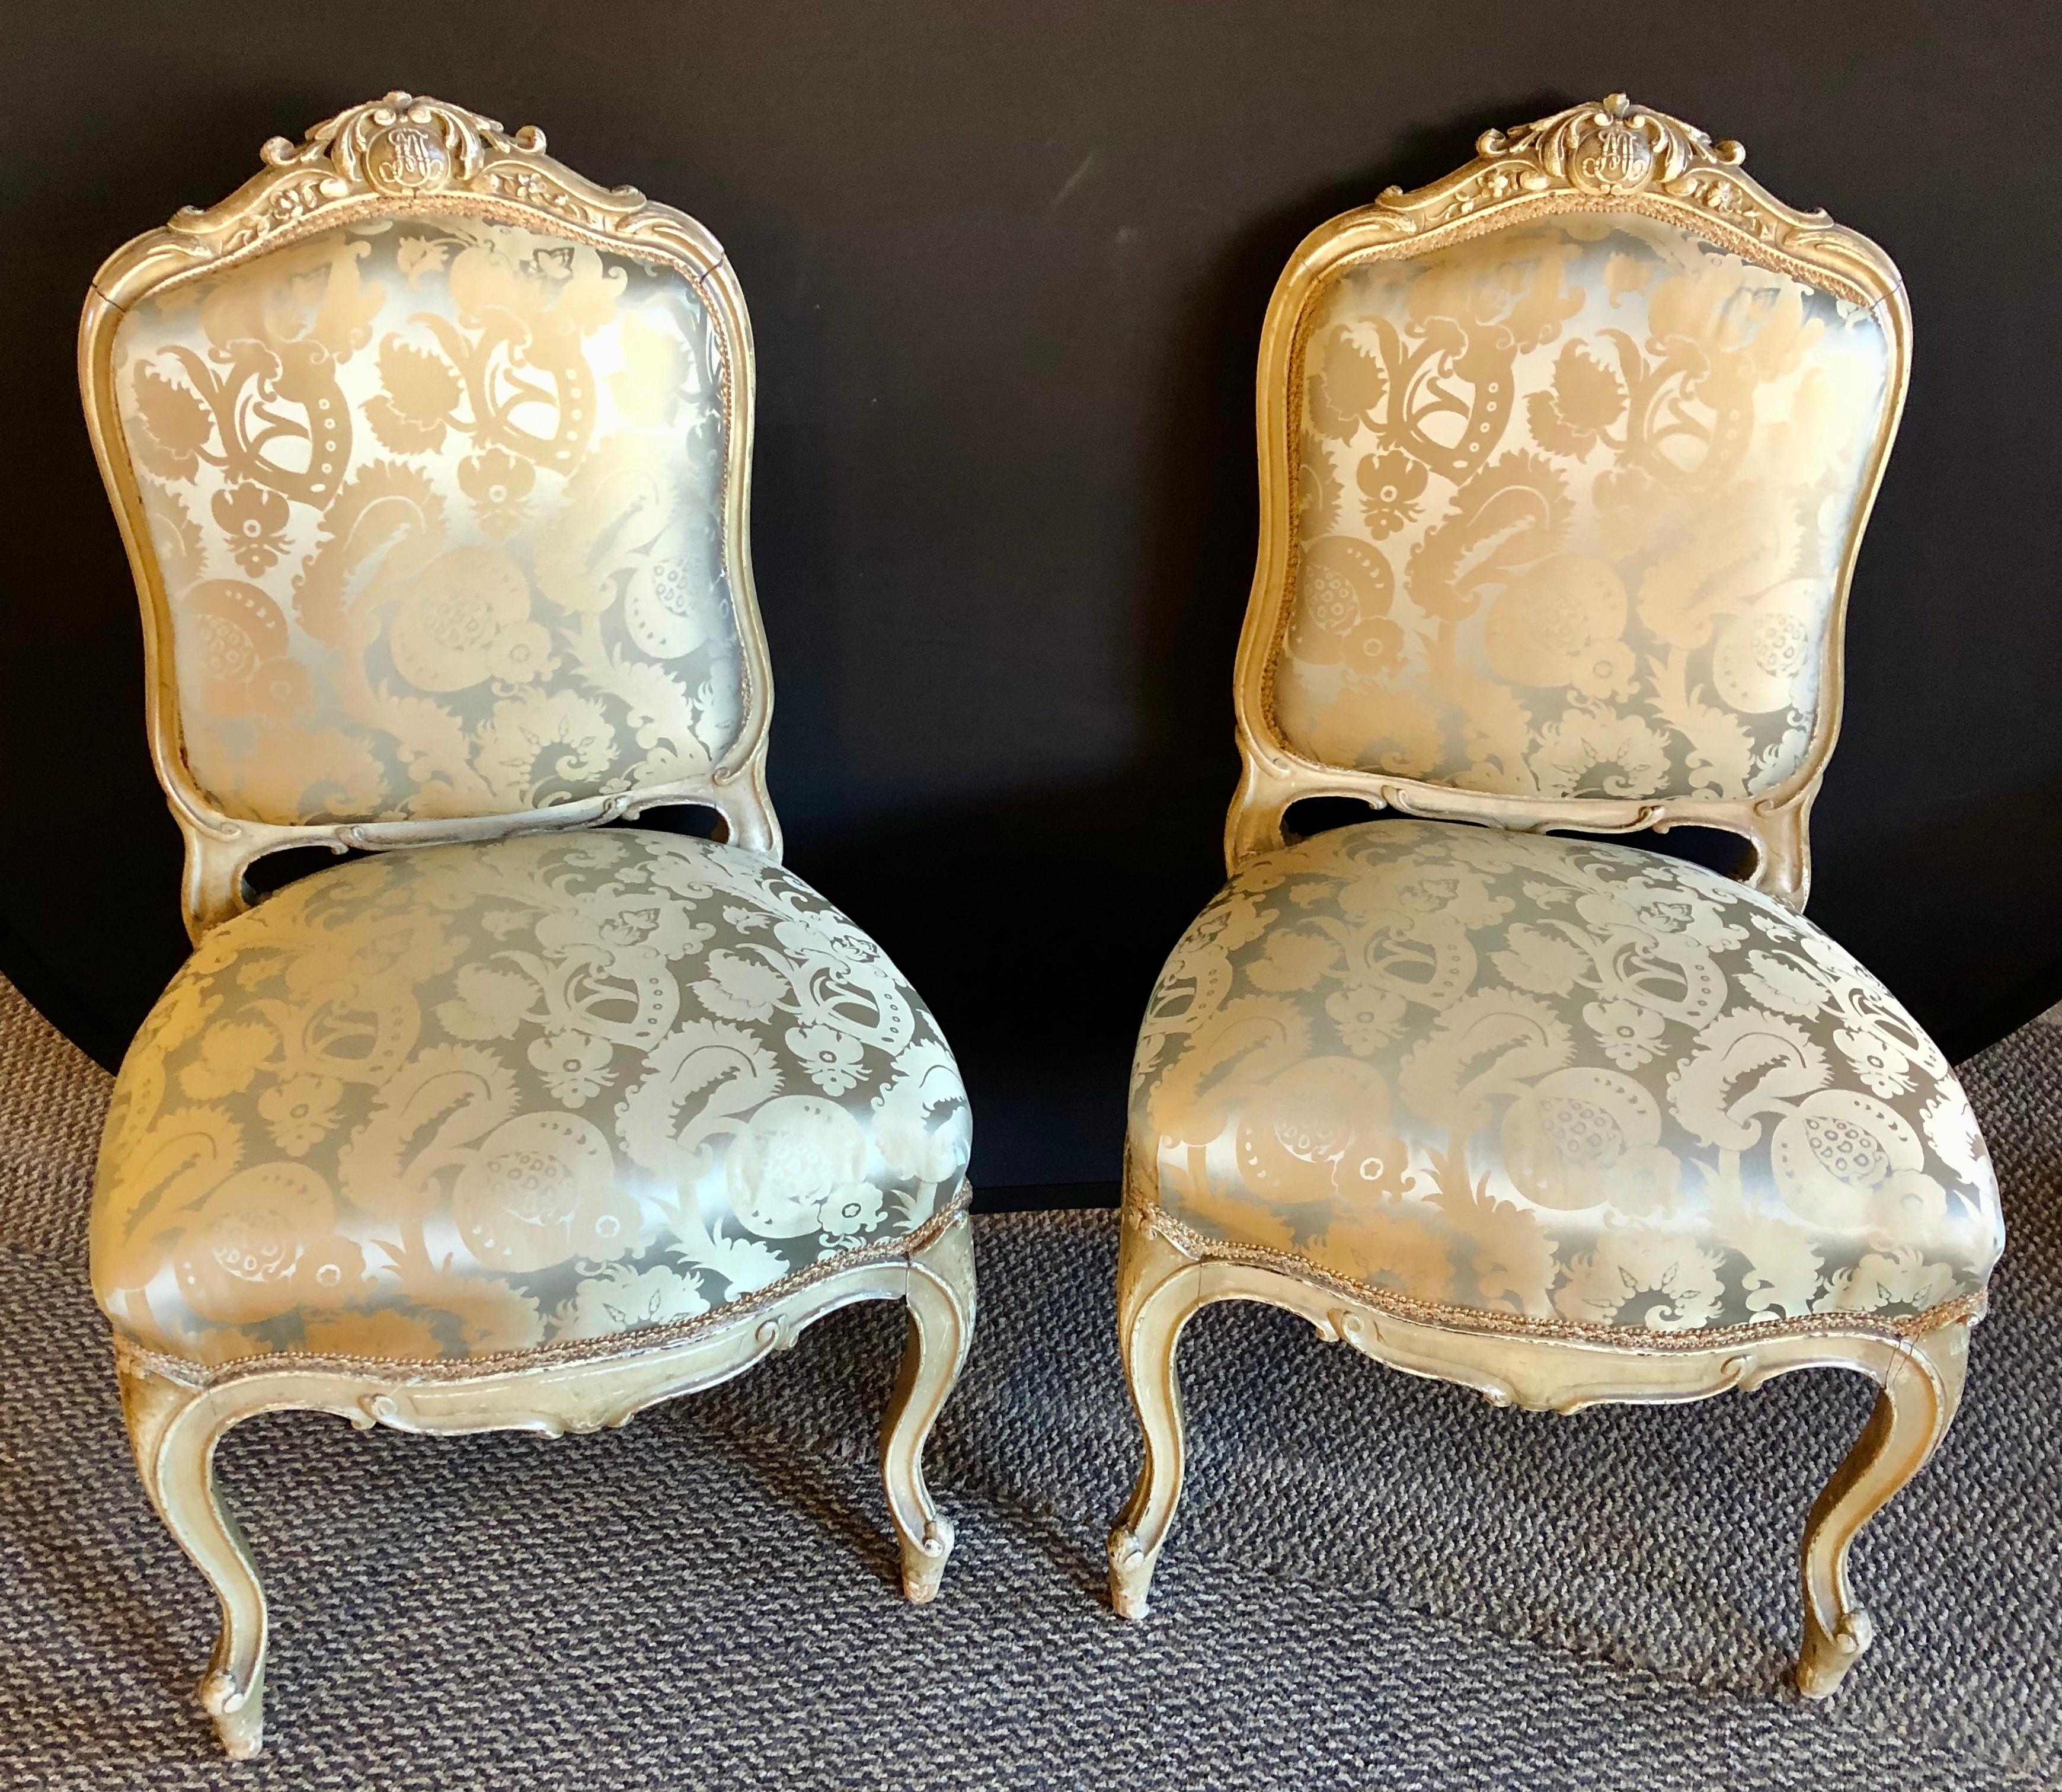 Pair of Maison Jansen slipper chairs in Scalamandre upholstery in fine frames. This is simply the finest pair of painted carved French frames one can wish to own. The silk Scalamandre upholstery is very clean with a lace welting. The frames